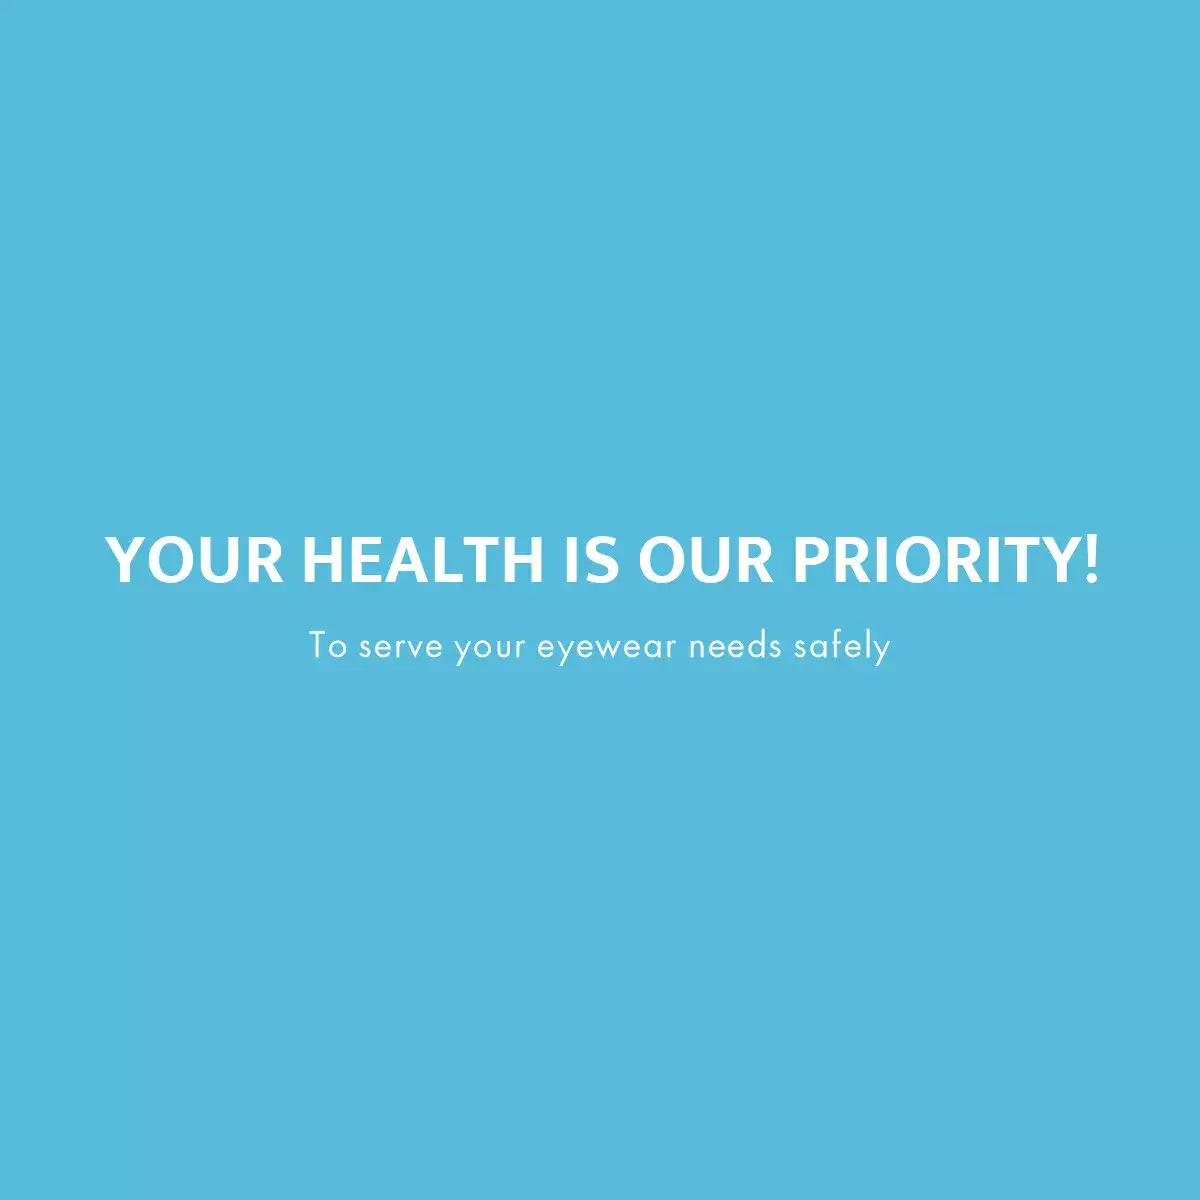 YOUR HEALTH IS OUR PRIORITY!